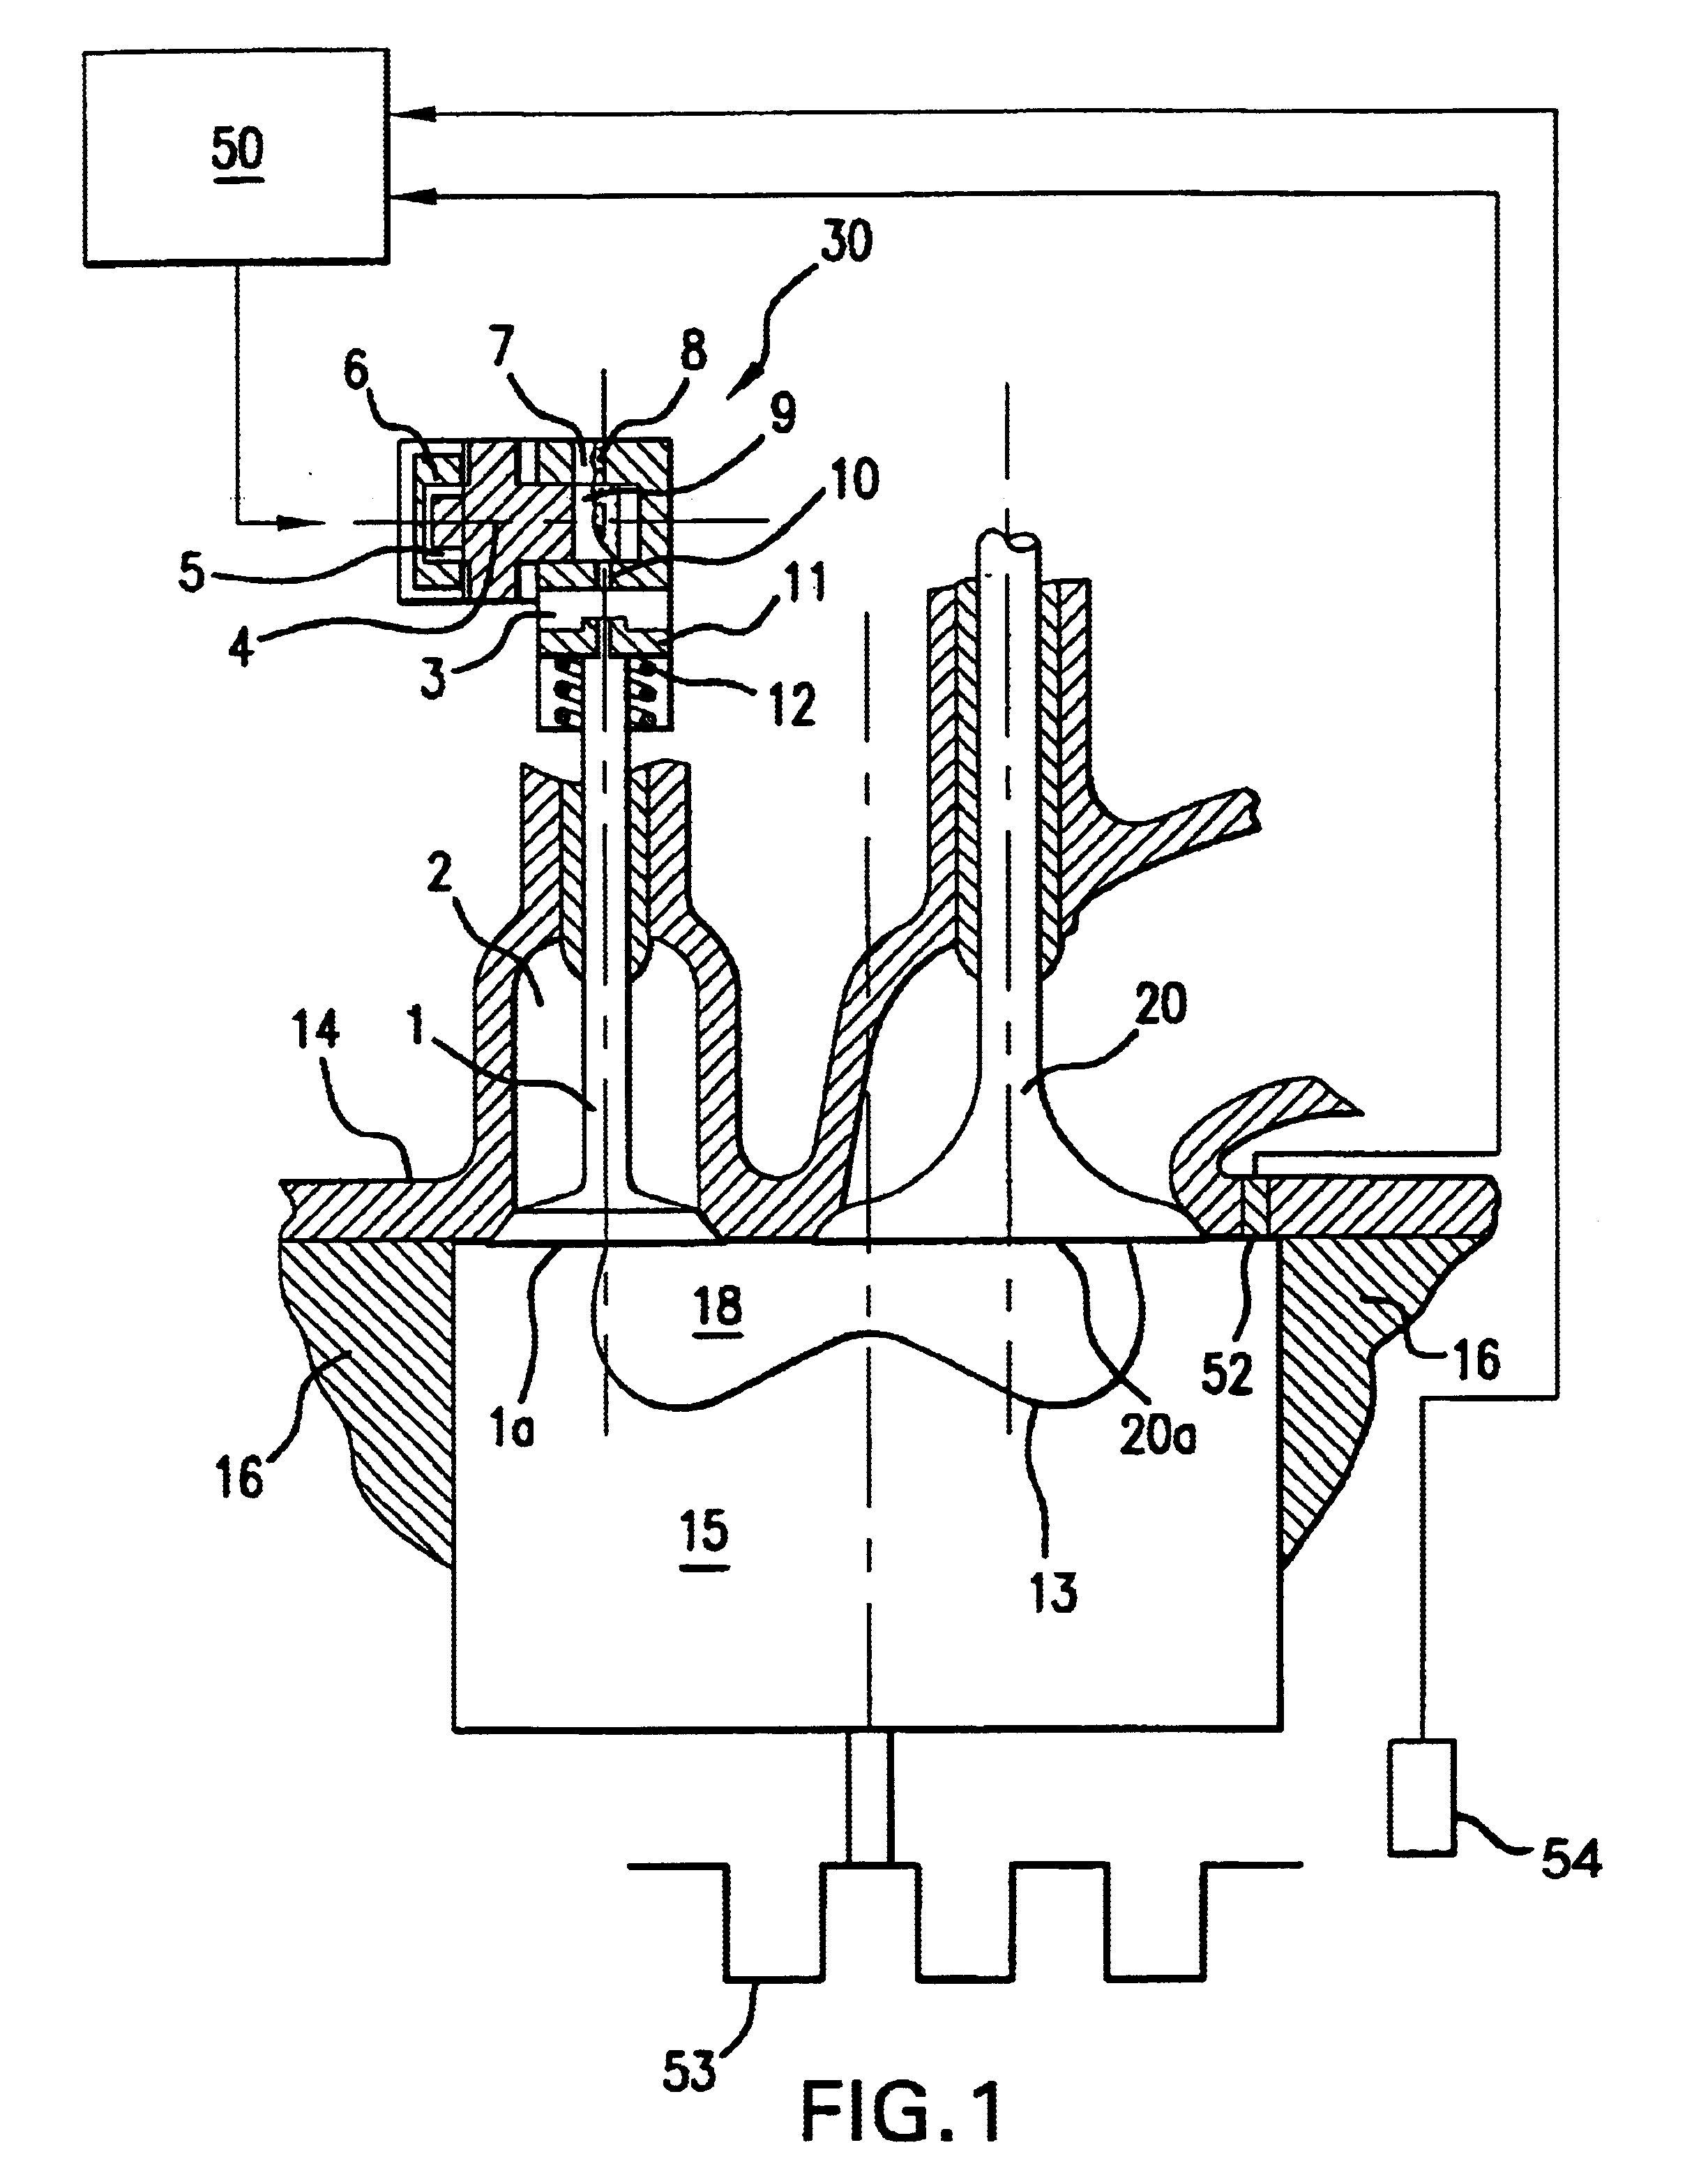 HCCI engine with combustion-tailoring chamber